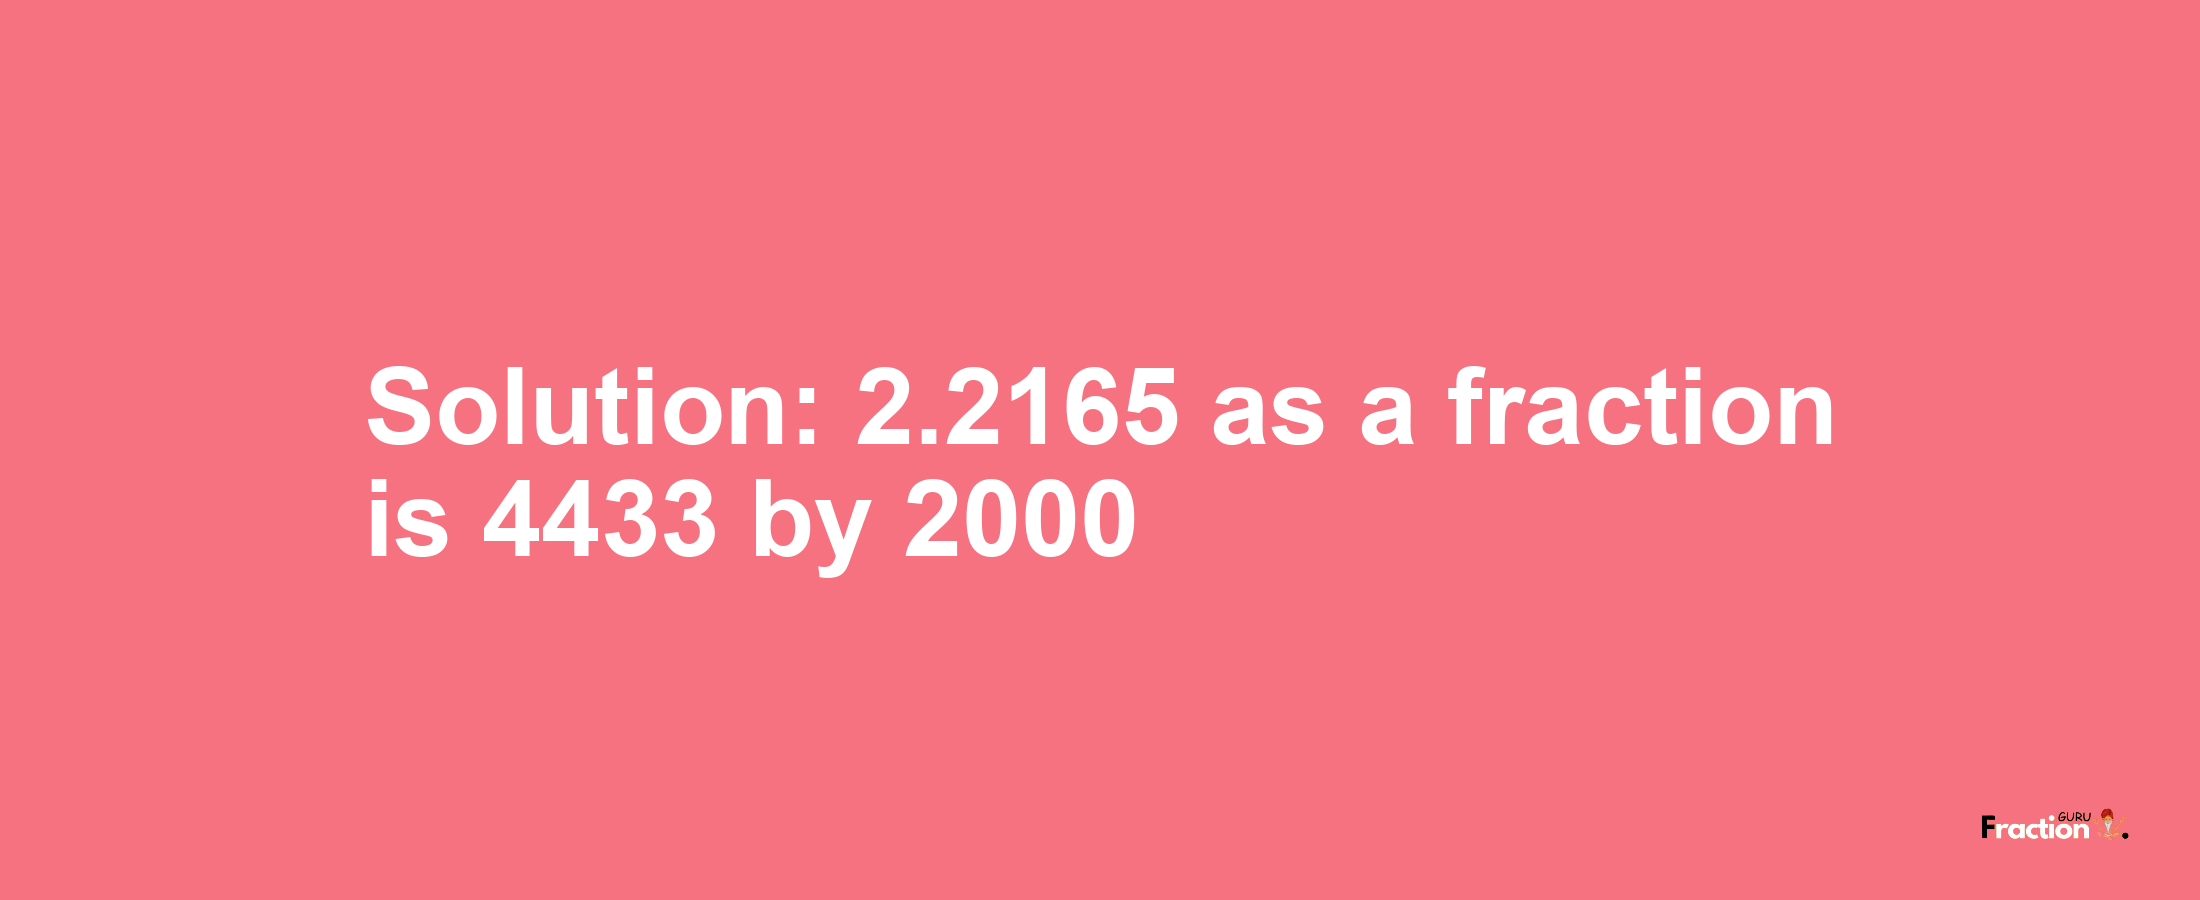 Solution:2.2165 as a fraction is 4433/2000